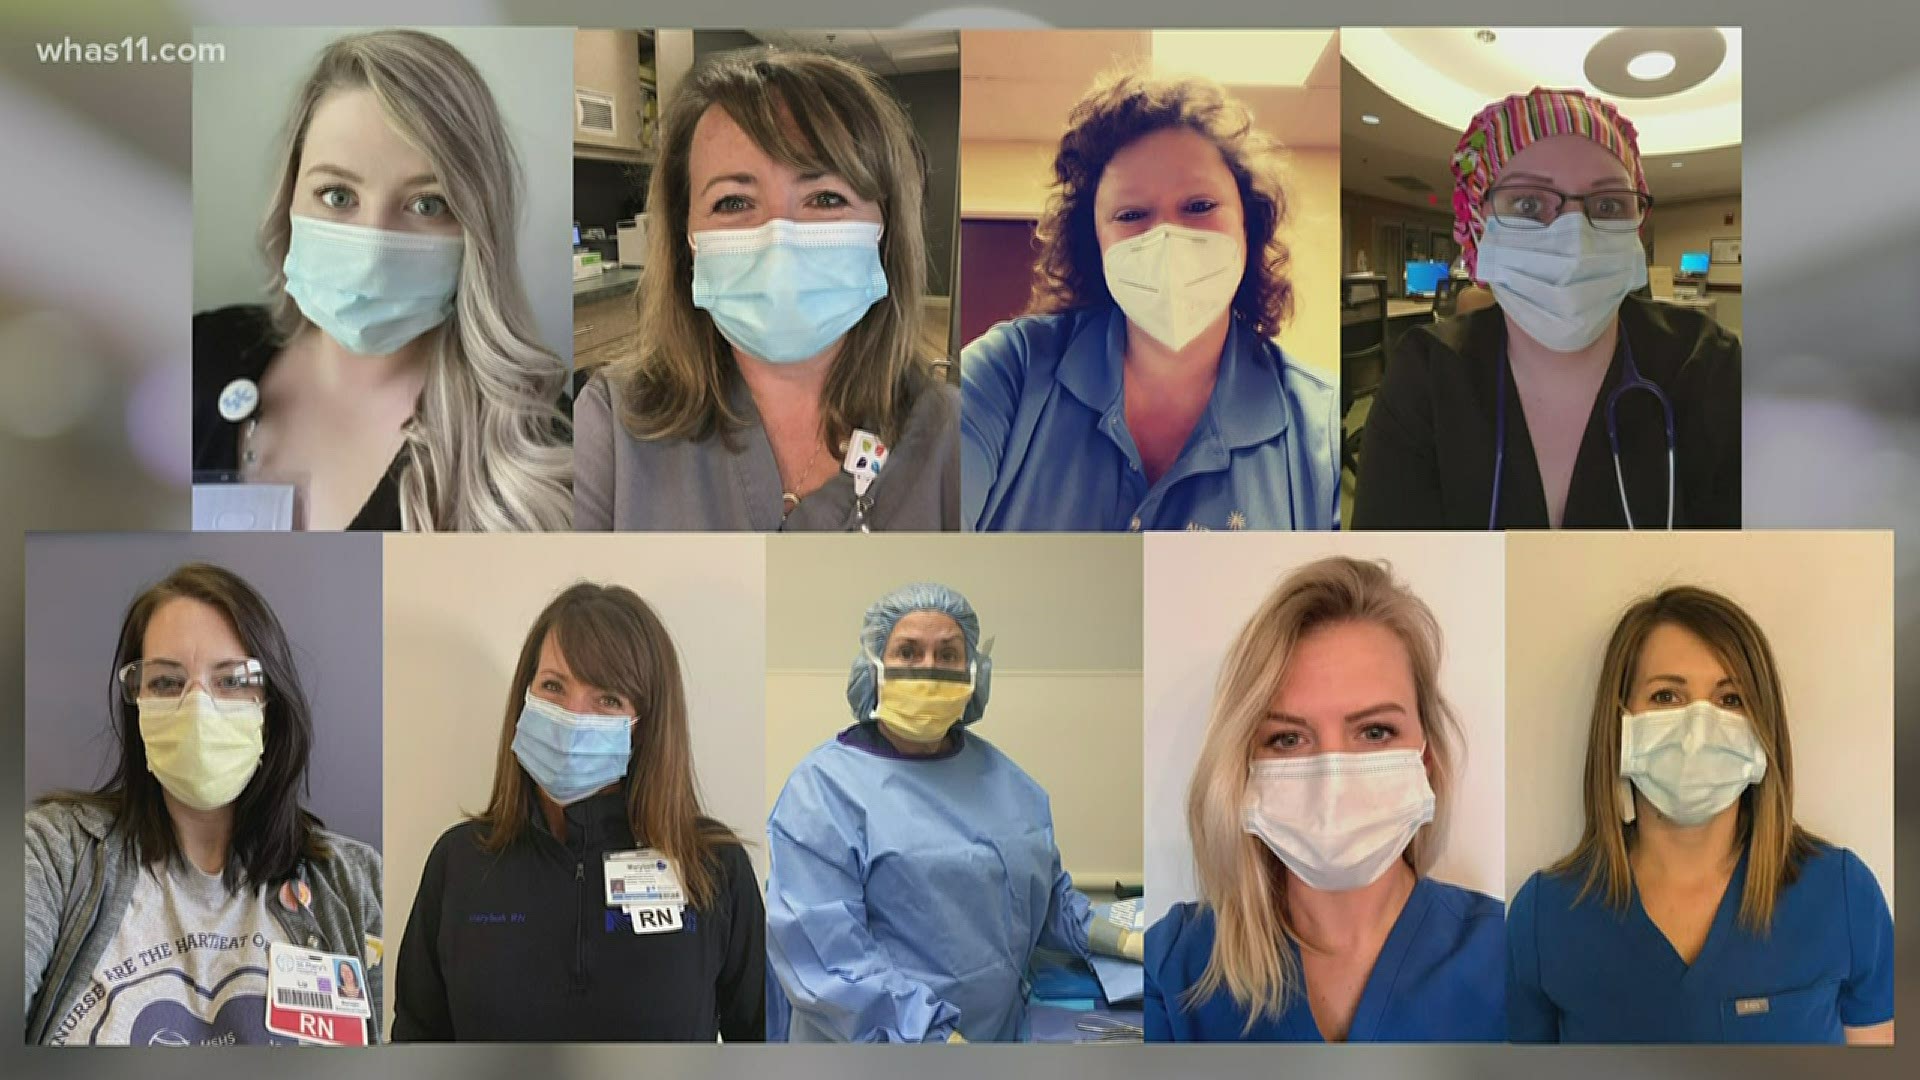 They all took different paths, but these nine women are nurses today at hospitals across Kentucky, Indiana and Illinois.